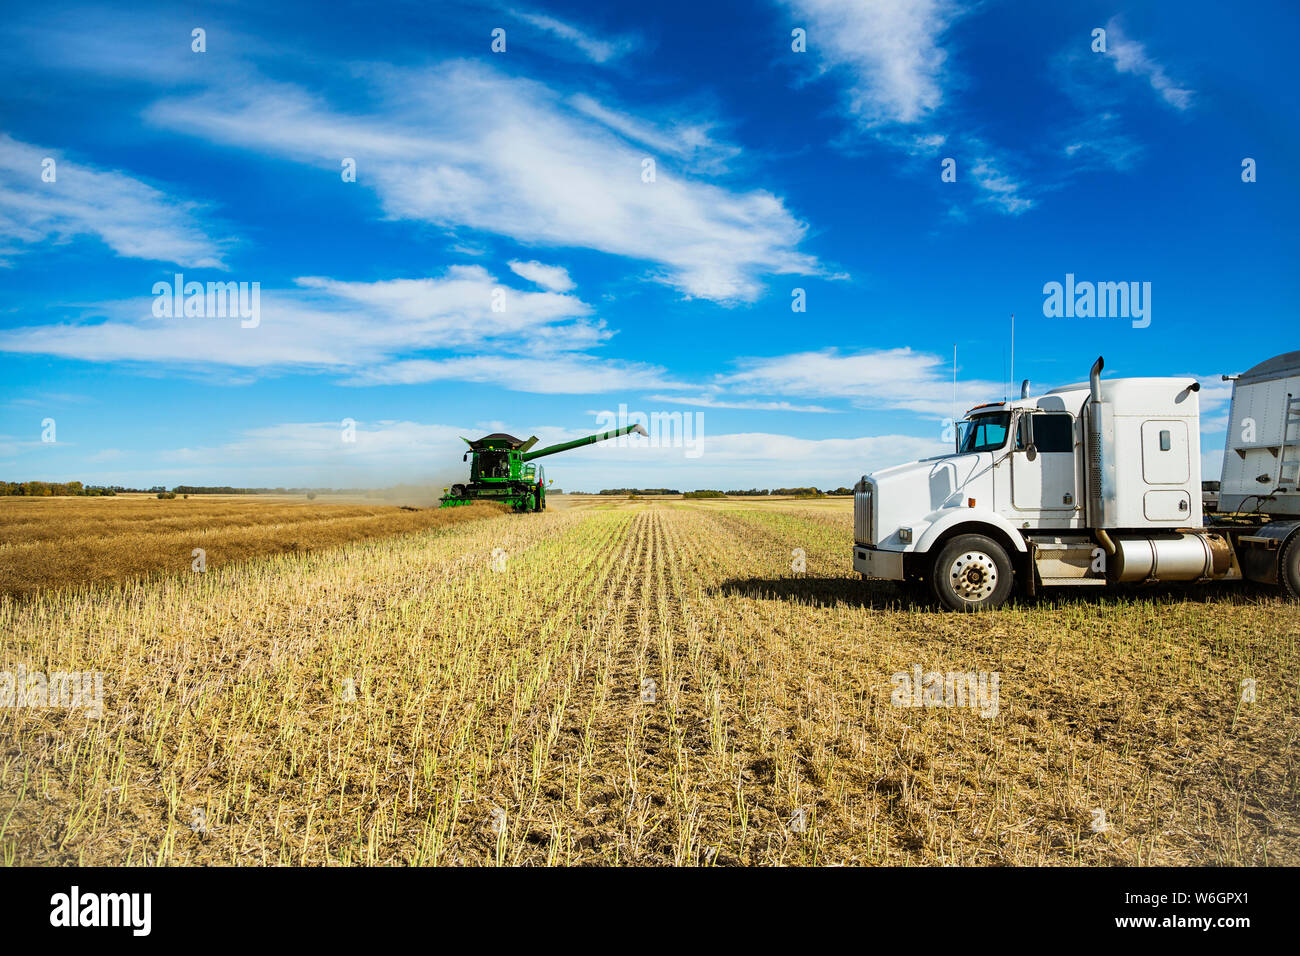 A grain truck waits for its next load during a Canola harvest while a combine is at work in the field; Legal, Alberta, Canada Stock Photo